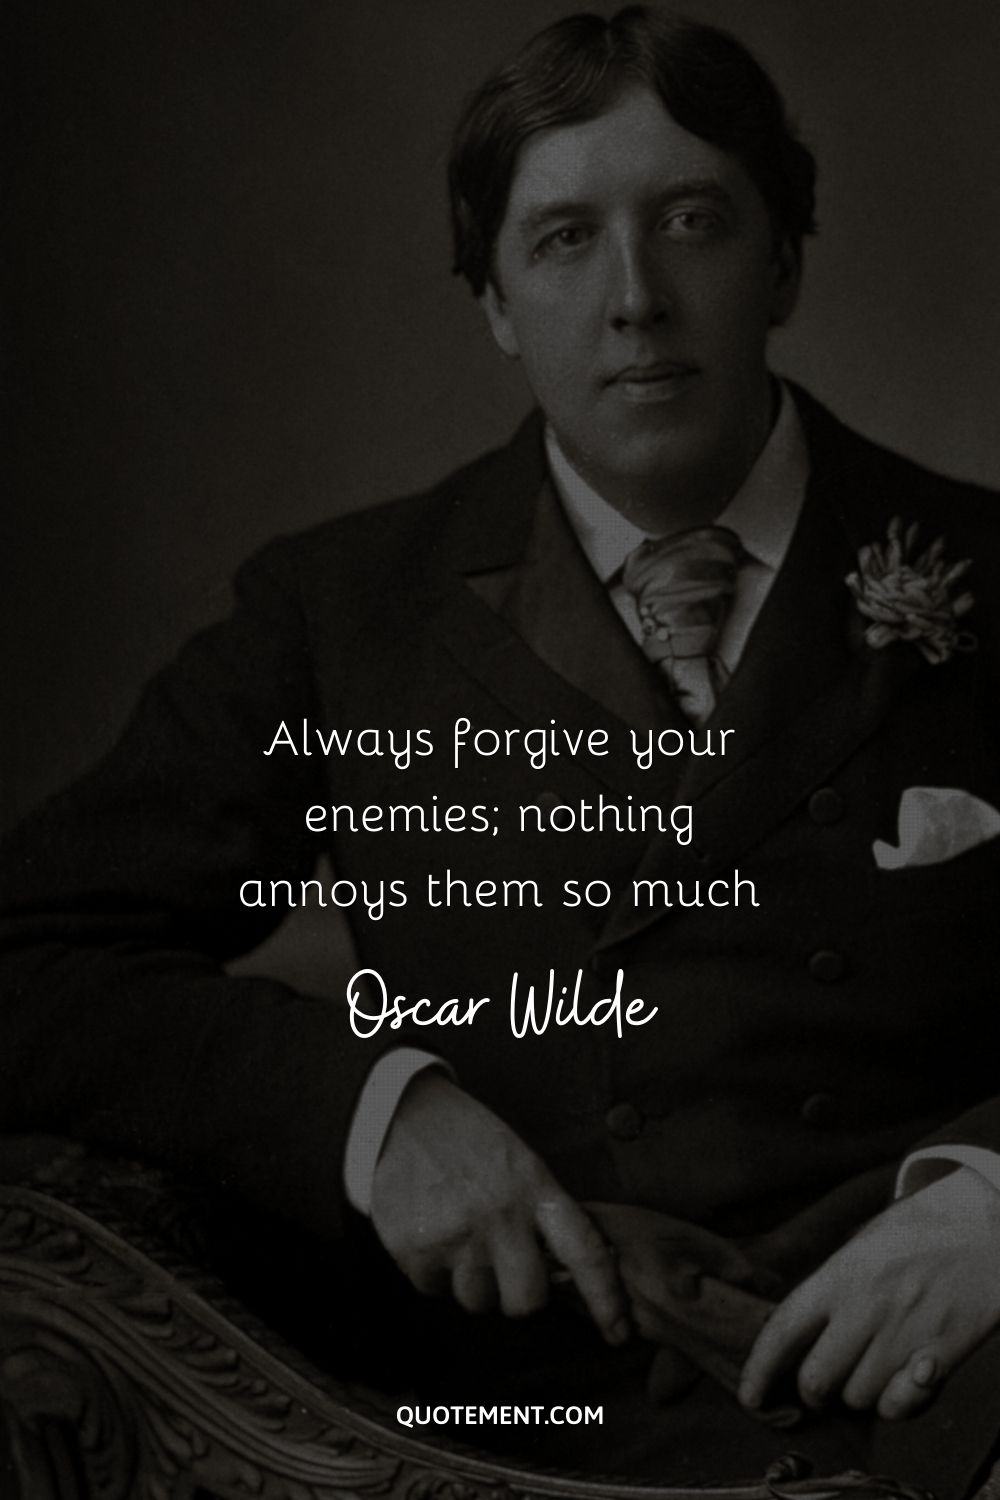 “Always forgive your enemies; nothing annoys them so much” ― Oscar Wilde